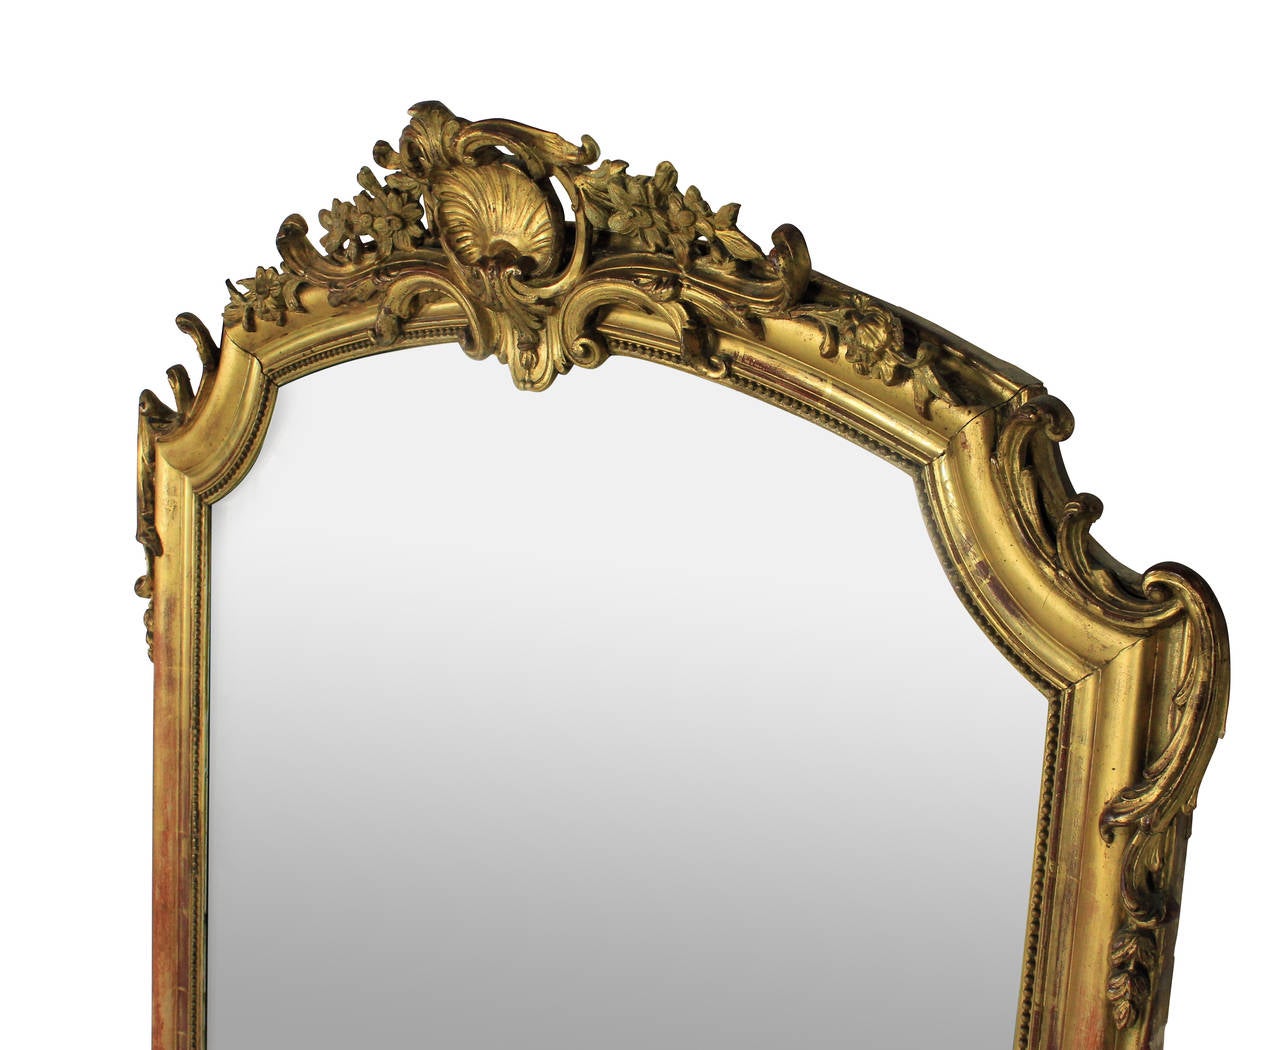 A fine French Napoleon III carved gilt wood over mantle mirror.